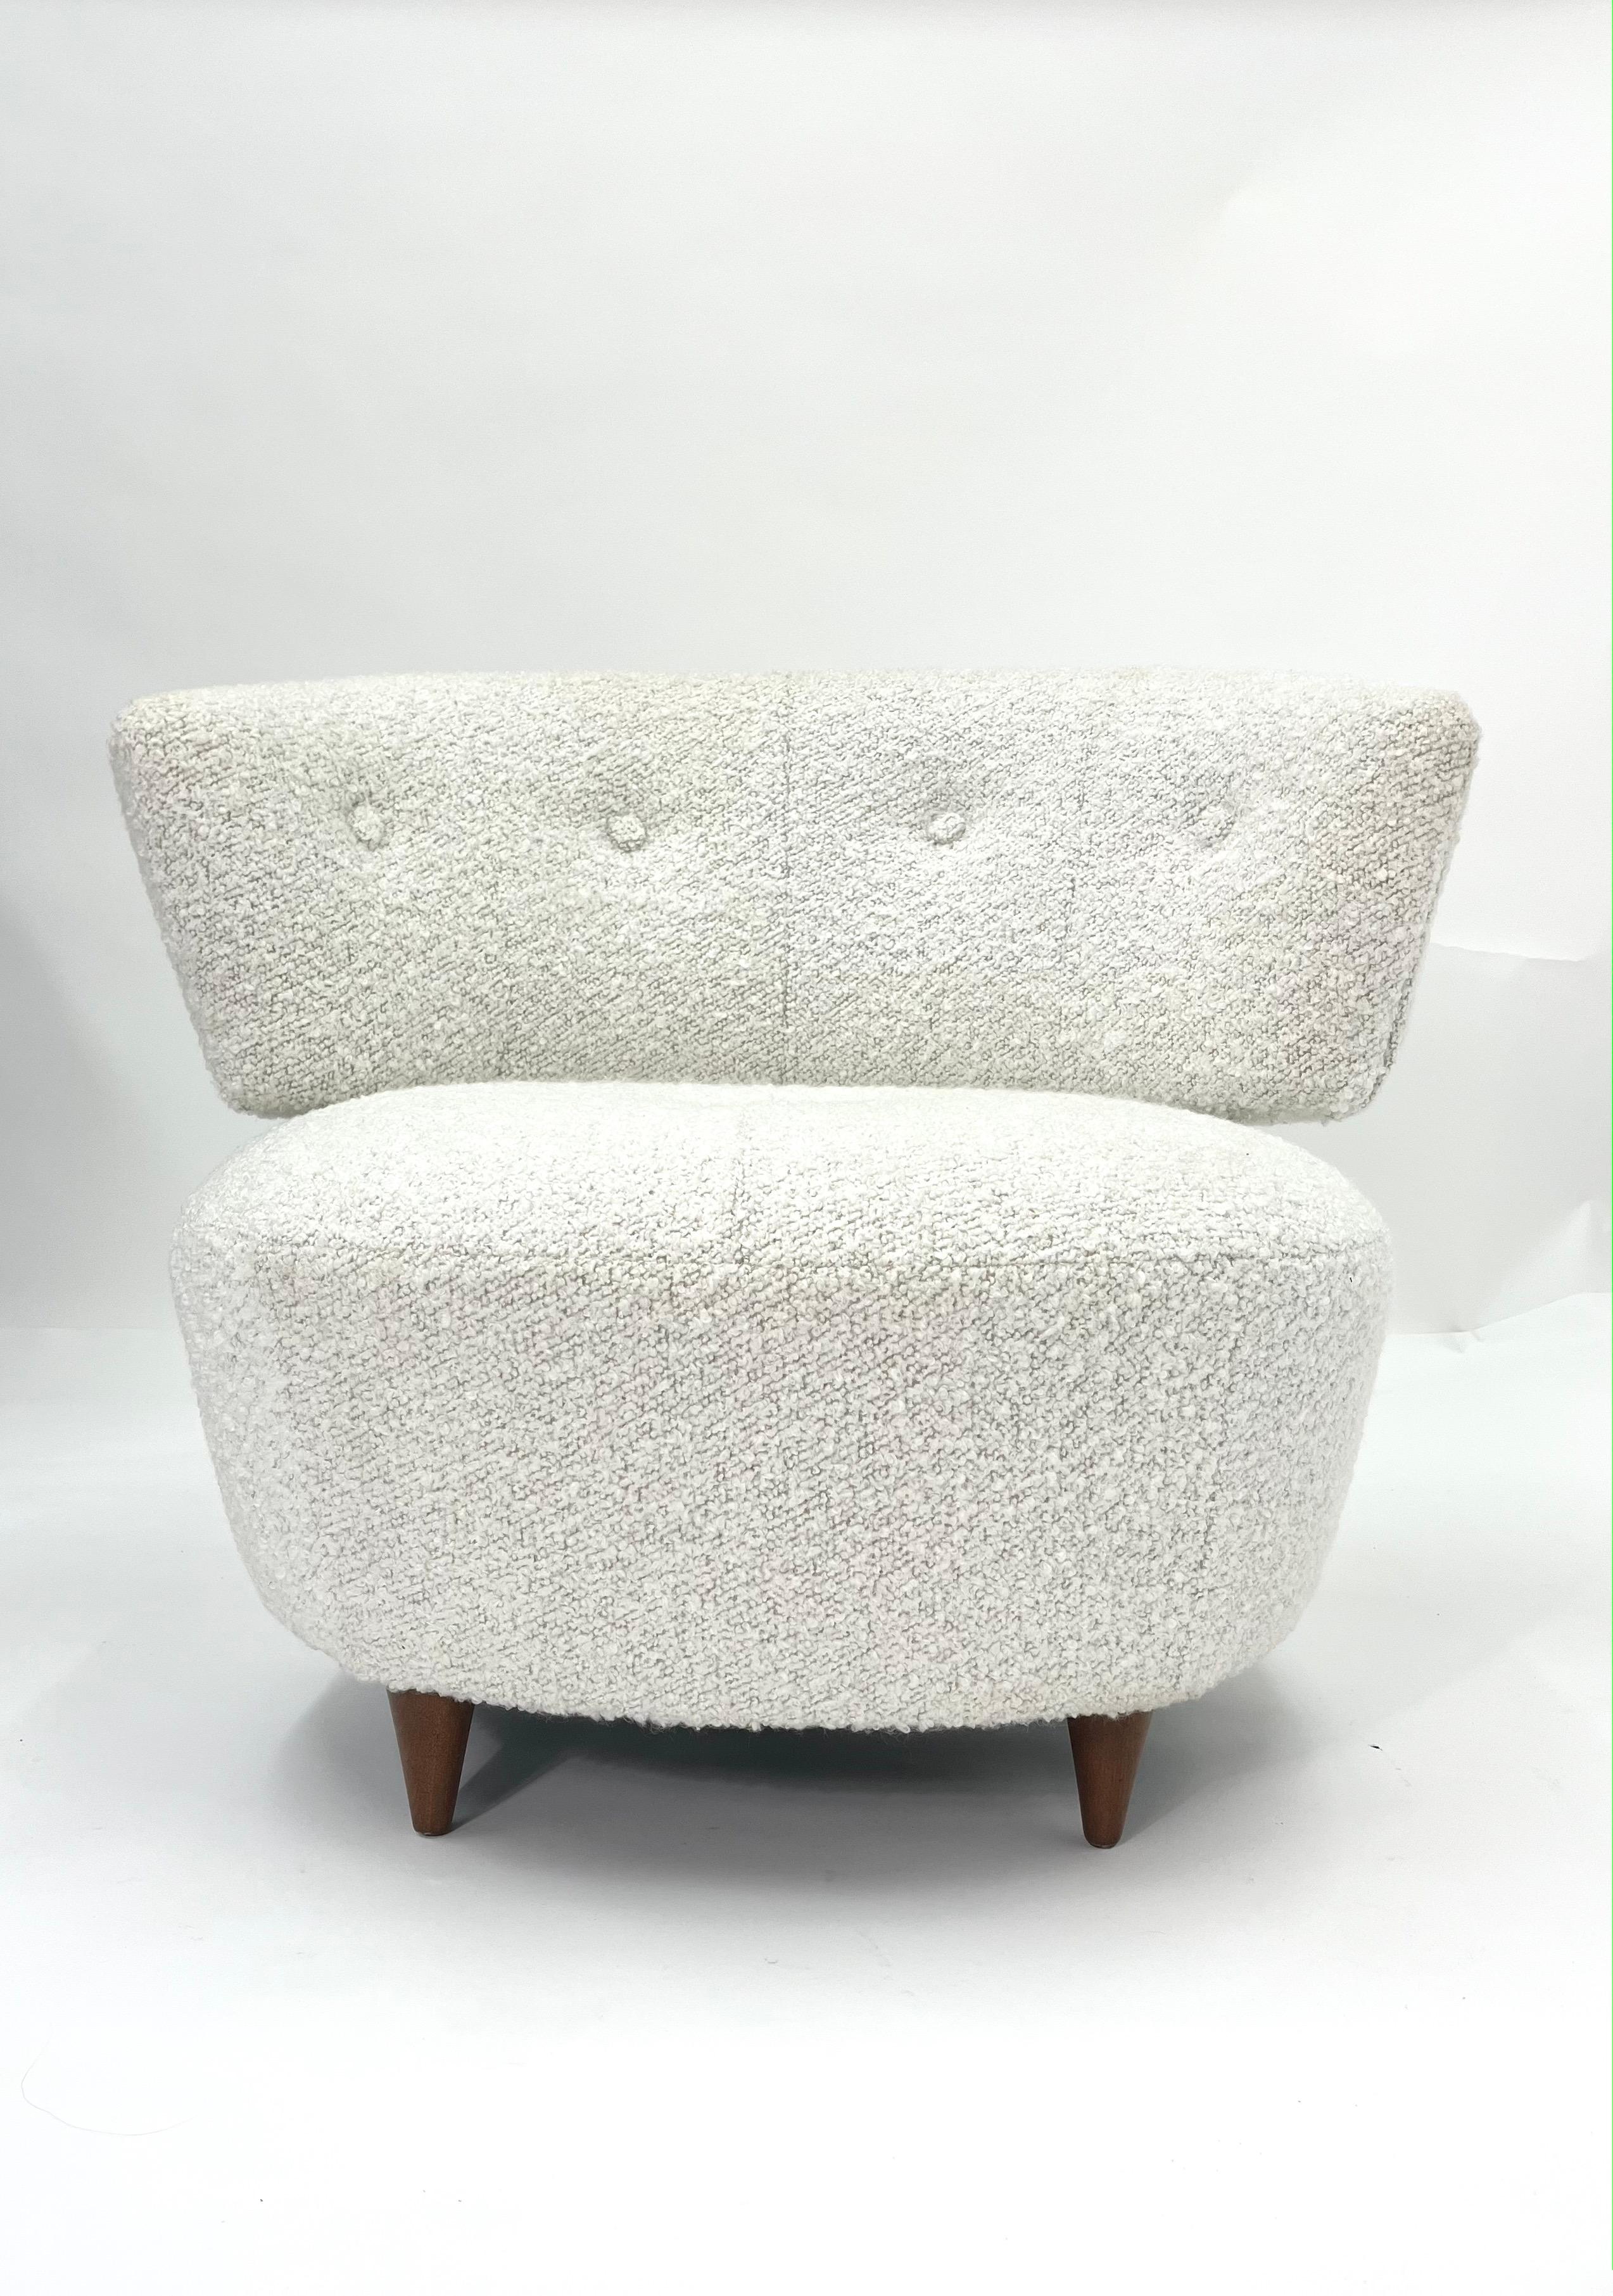 Gilbert Rohde slipper chair for Herman Miller, circa 1930s. Wonderful Art Deco, slipper, lounge chair by Gilbert Rohde for Herman Miller features a rounded profile with upholstered seat and back. This piece has been reupholstered in a Kravet white